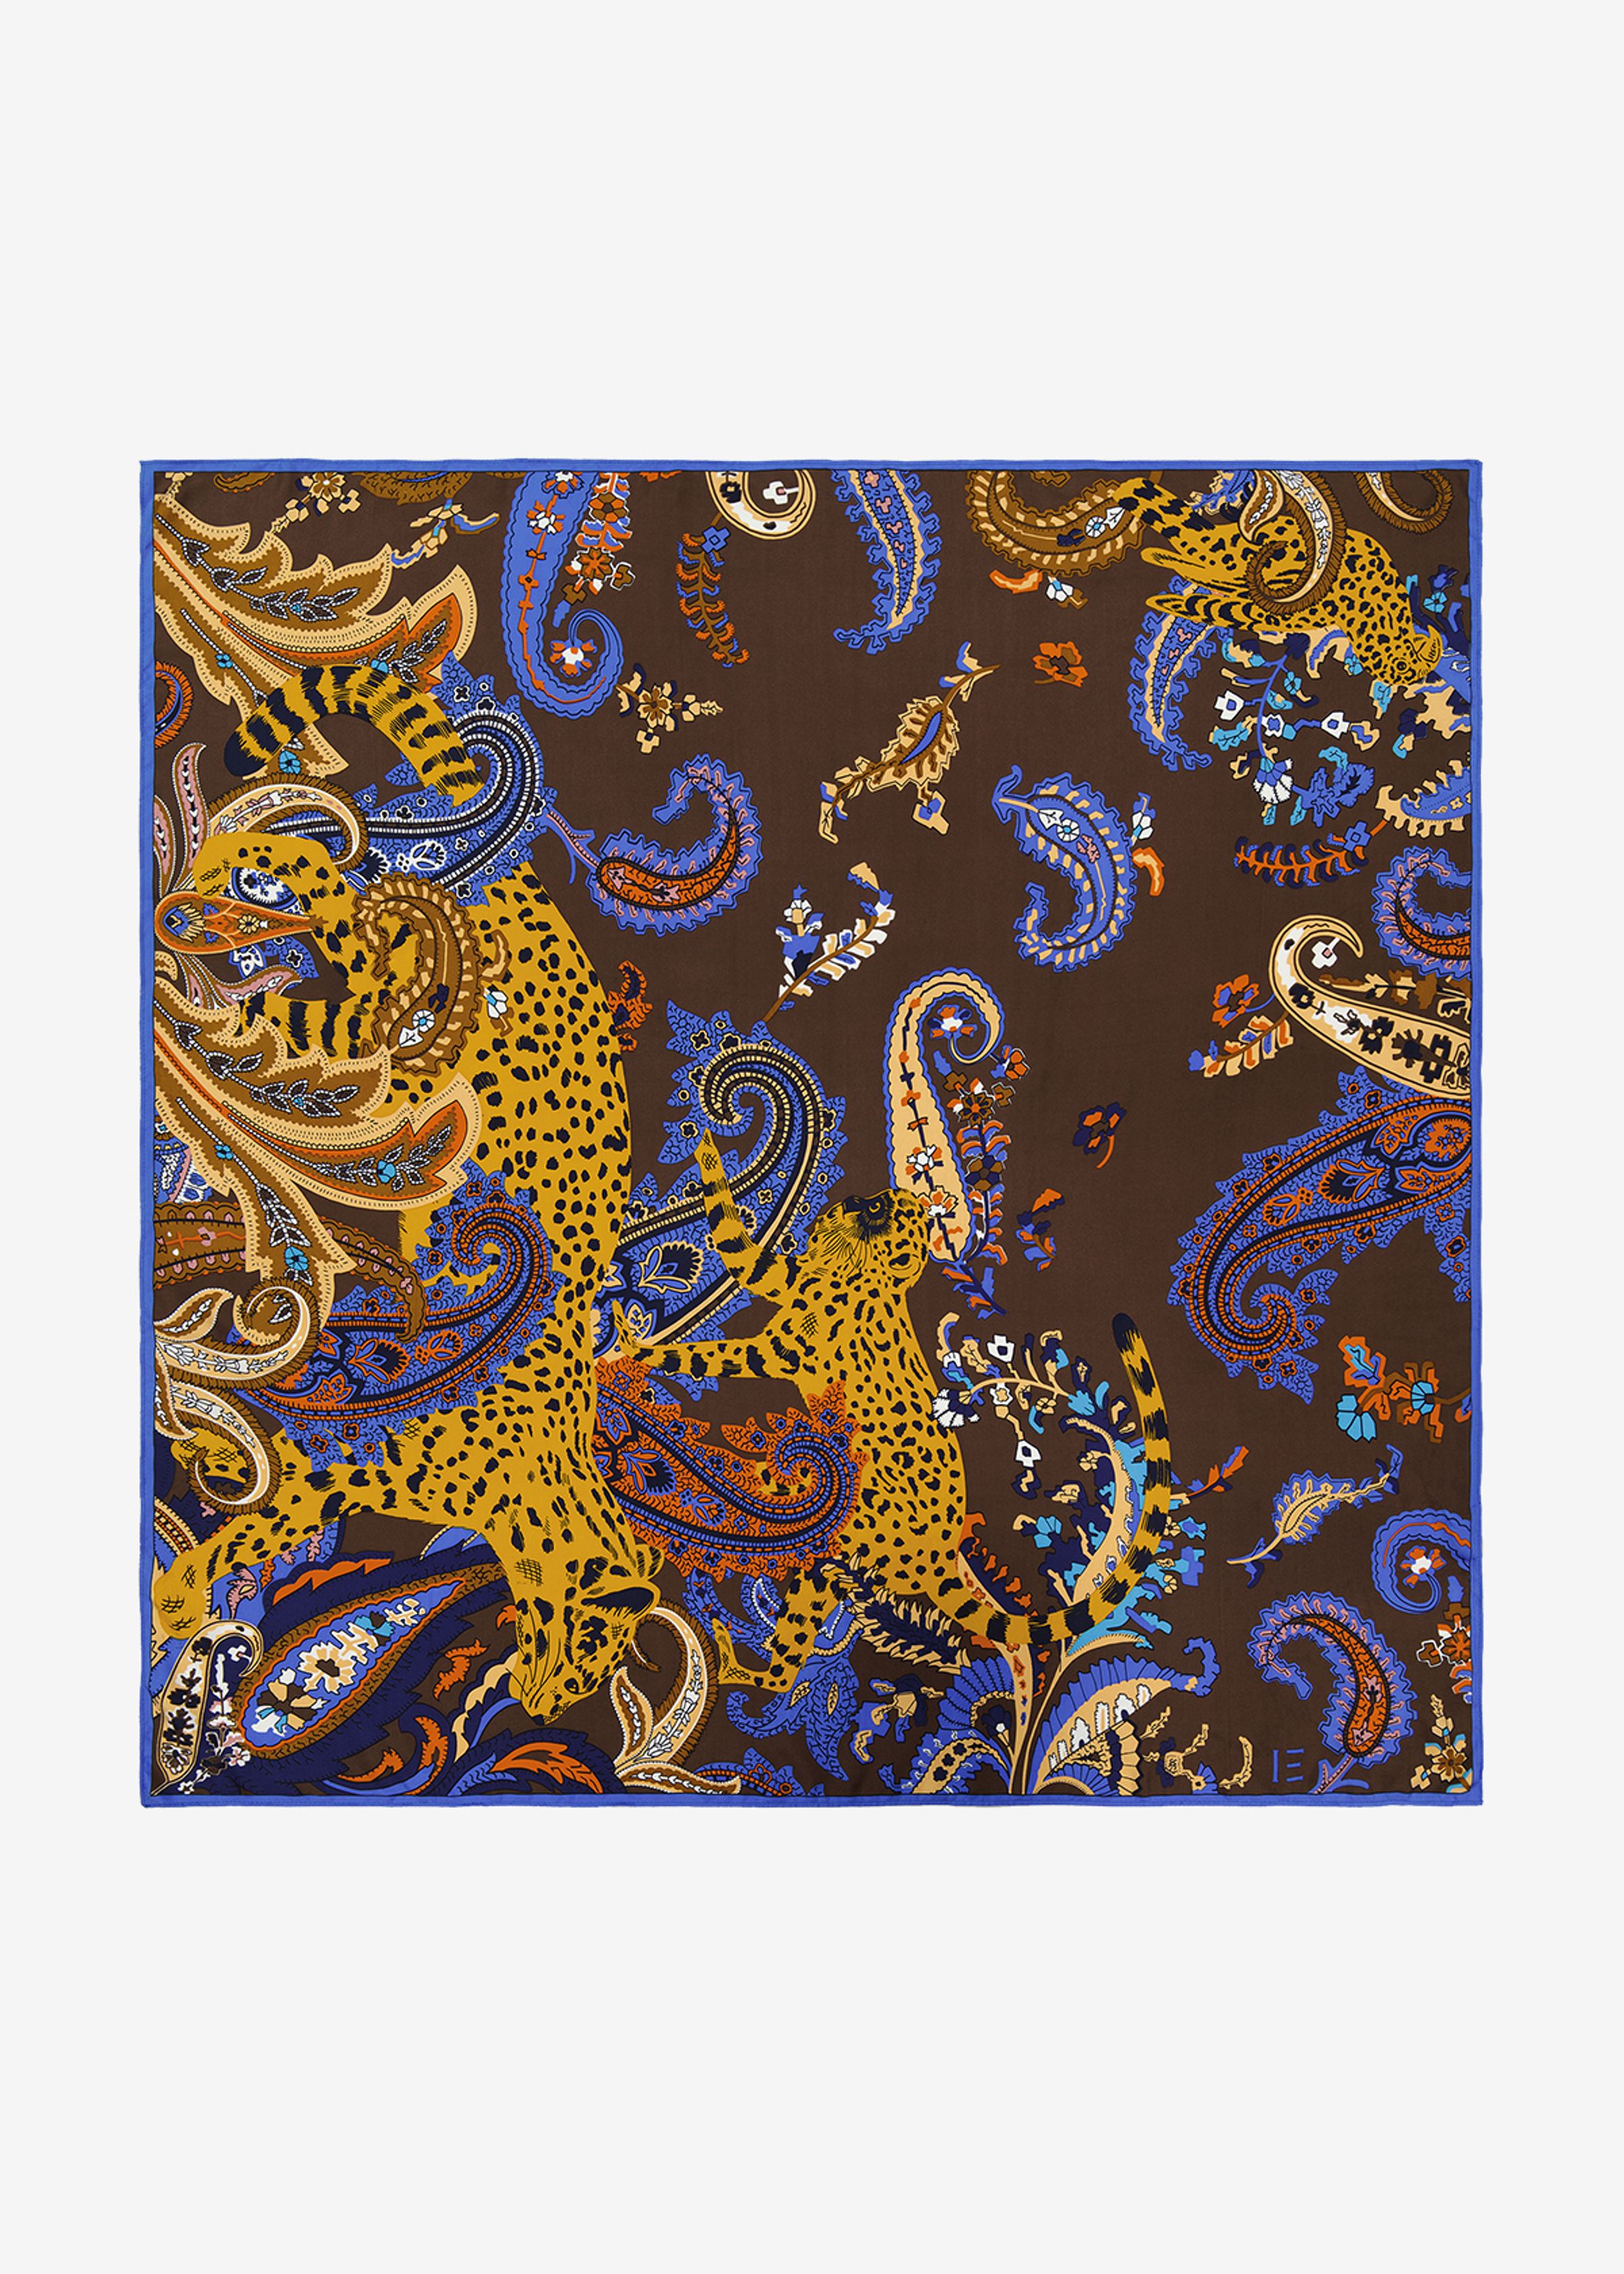 Square 100 - Paisley - Brown